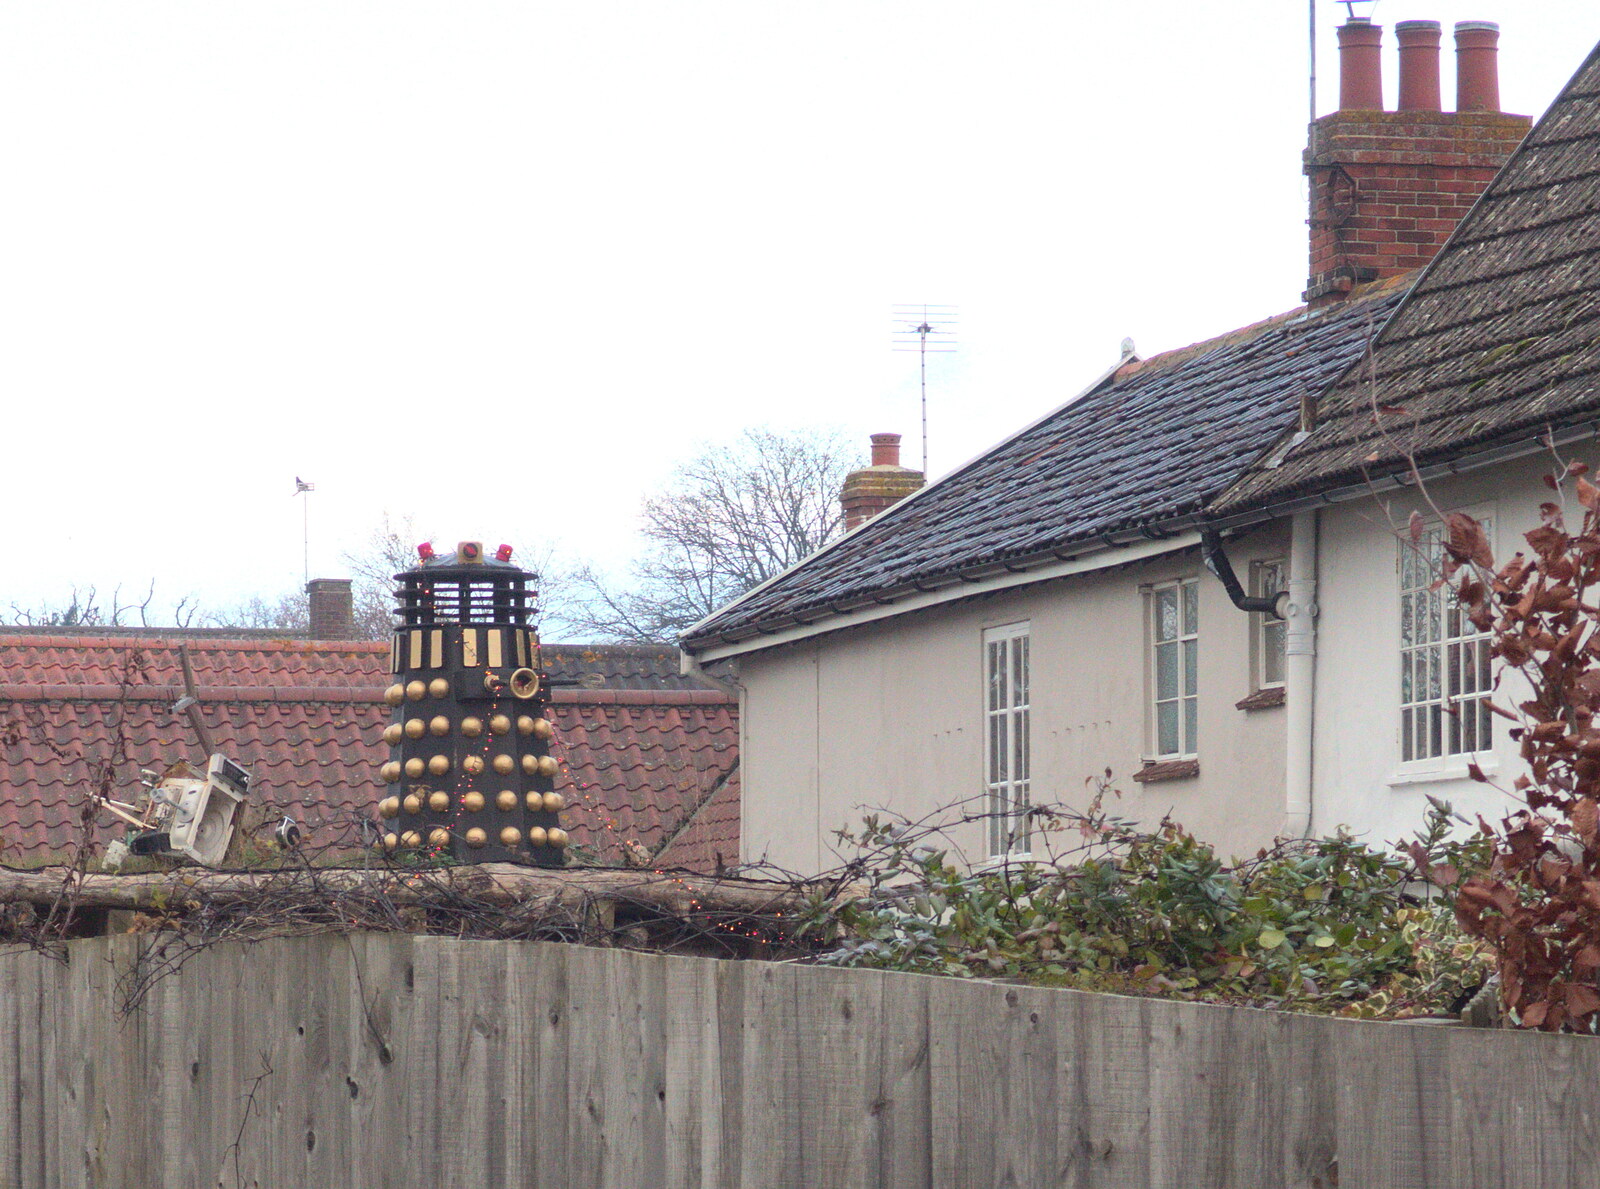 The Fair Green Dalek from New Year's Eve, The Oaksmere, Brome, Suffolk - 31st December 2016